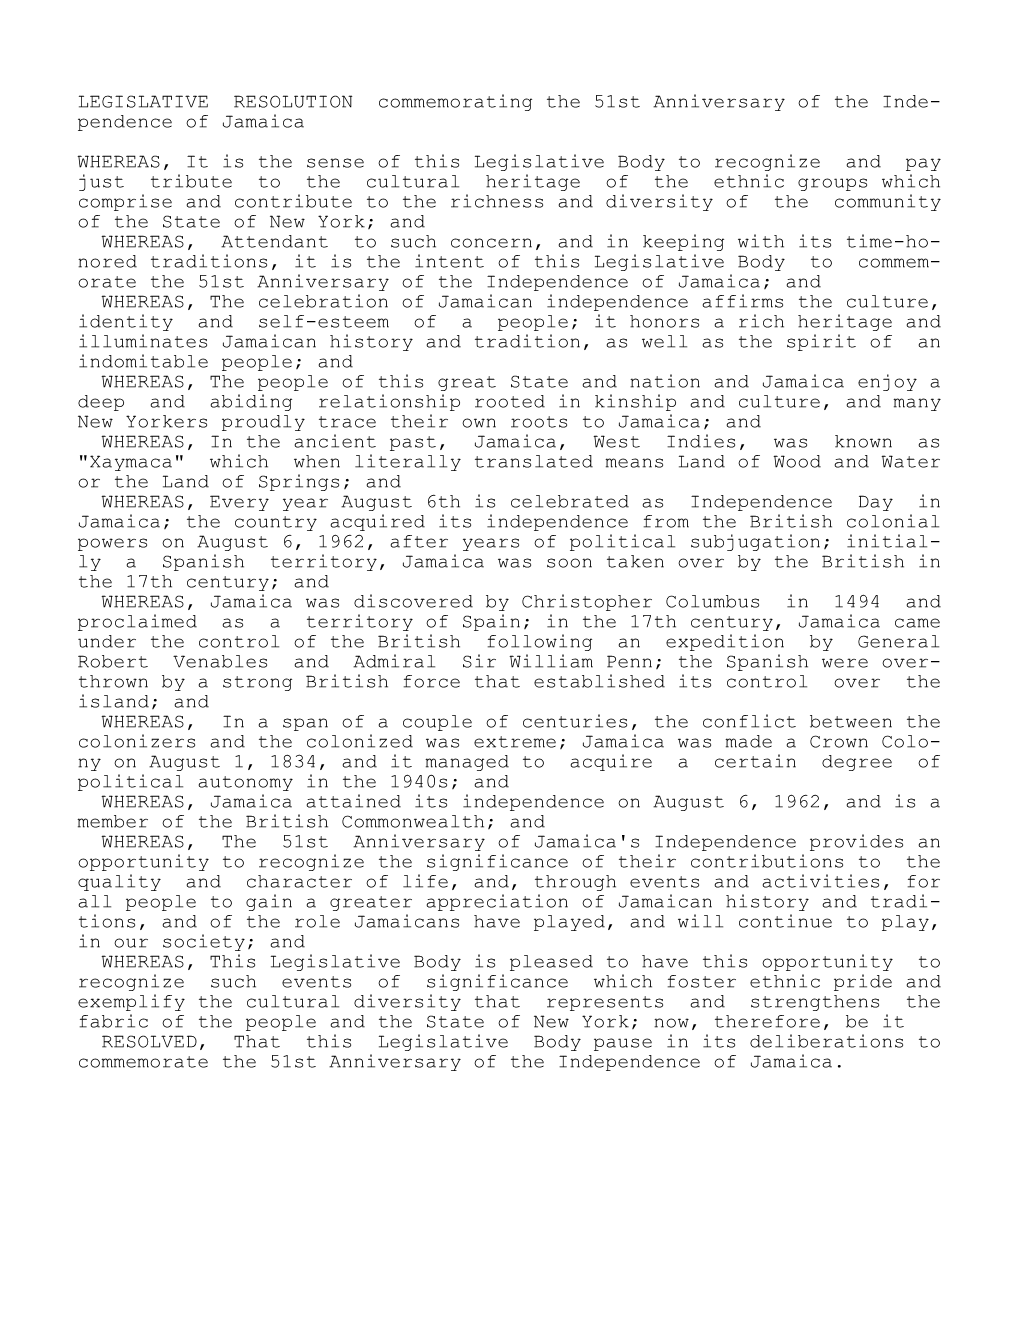 LEGISLATIVE RESOLUTION Commemorating the 51St Anniversary of the Inde- Pendence of Jamaica